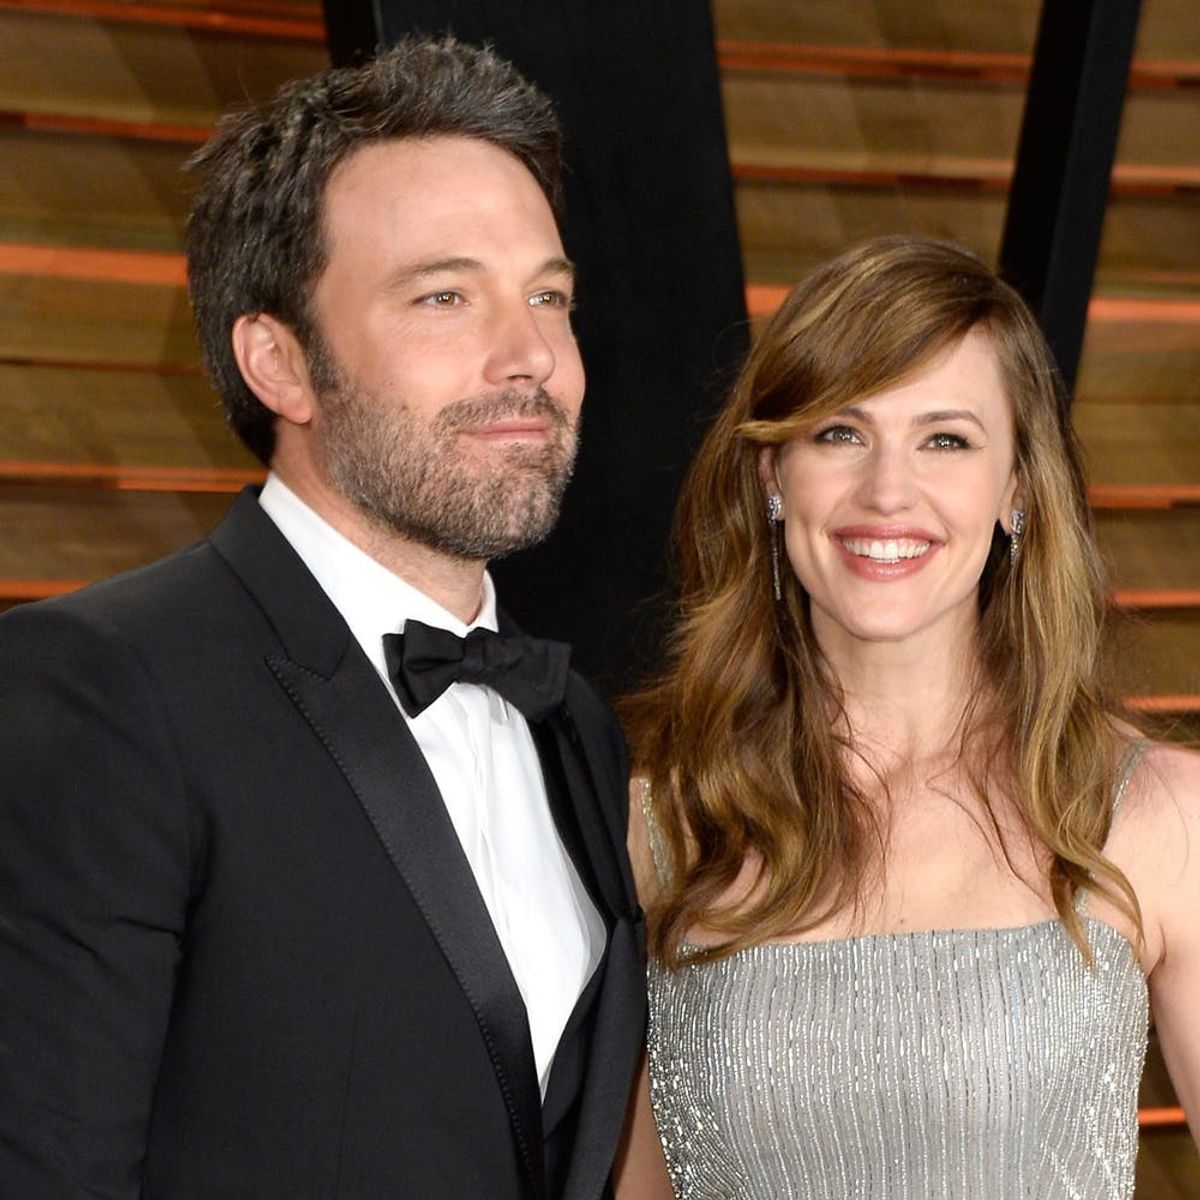 Ben Affleck Just Very Publicly Thanked Jennifer Garner for Her Help With His Addiction Struggles